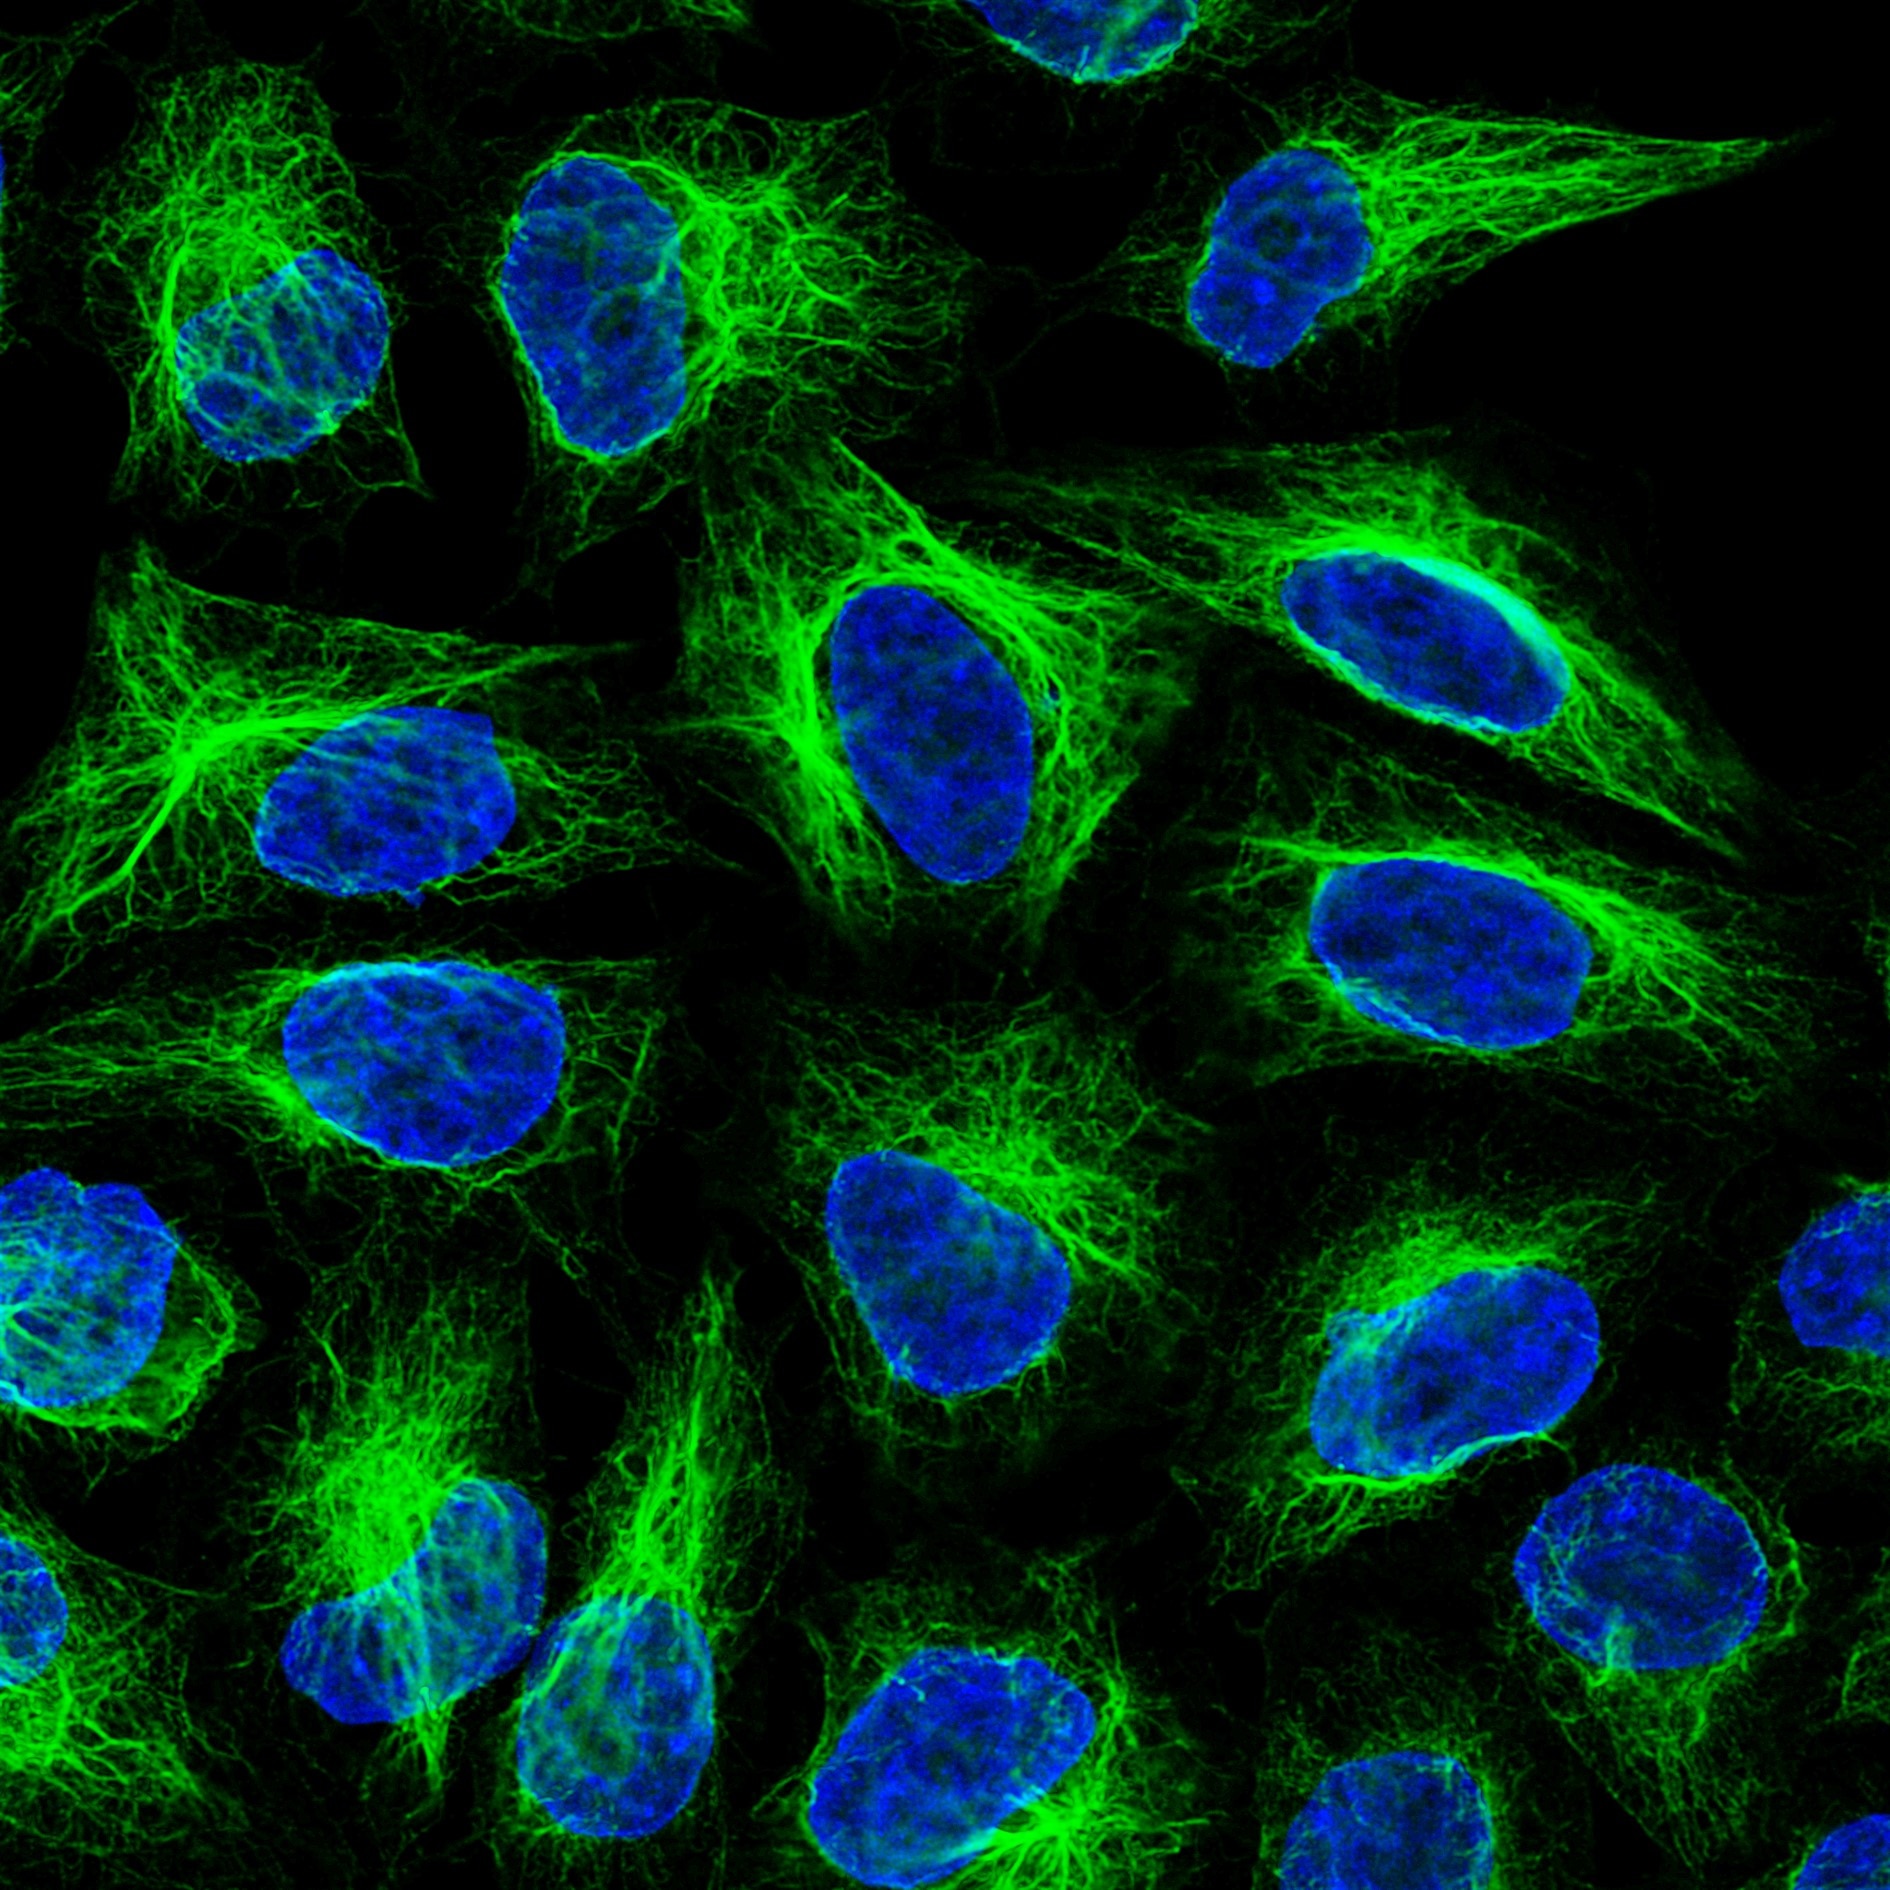 Immunofluorescence analysis of HeLa cells stained with mouse IgG1 anti-vimentin antibody and Nano-Secondary® alpaca anti-mouse IgG1, recombinant VHH, CoraLite® Plus 488 (smsG1CL488-1, green). Nuclei were stained with DAPI (blue).